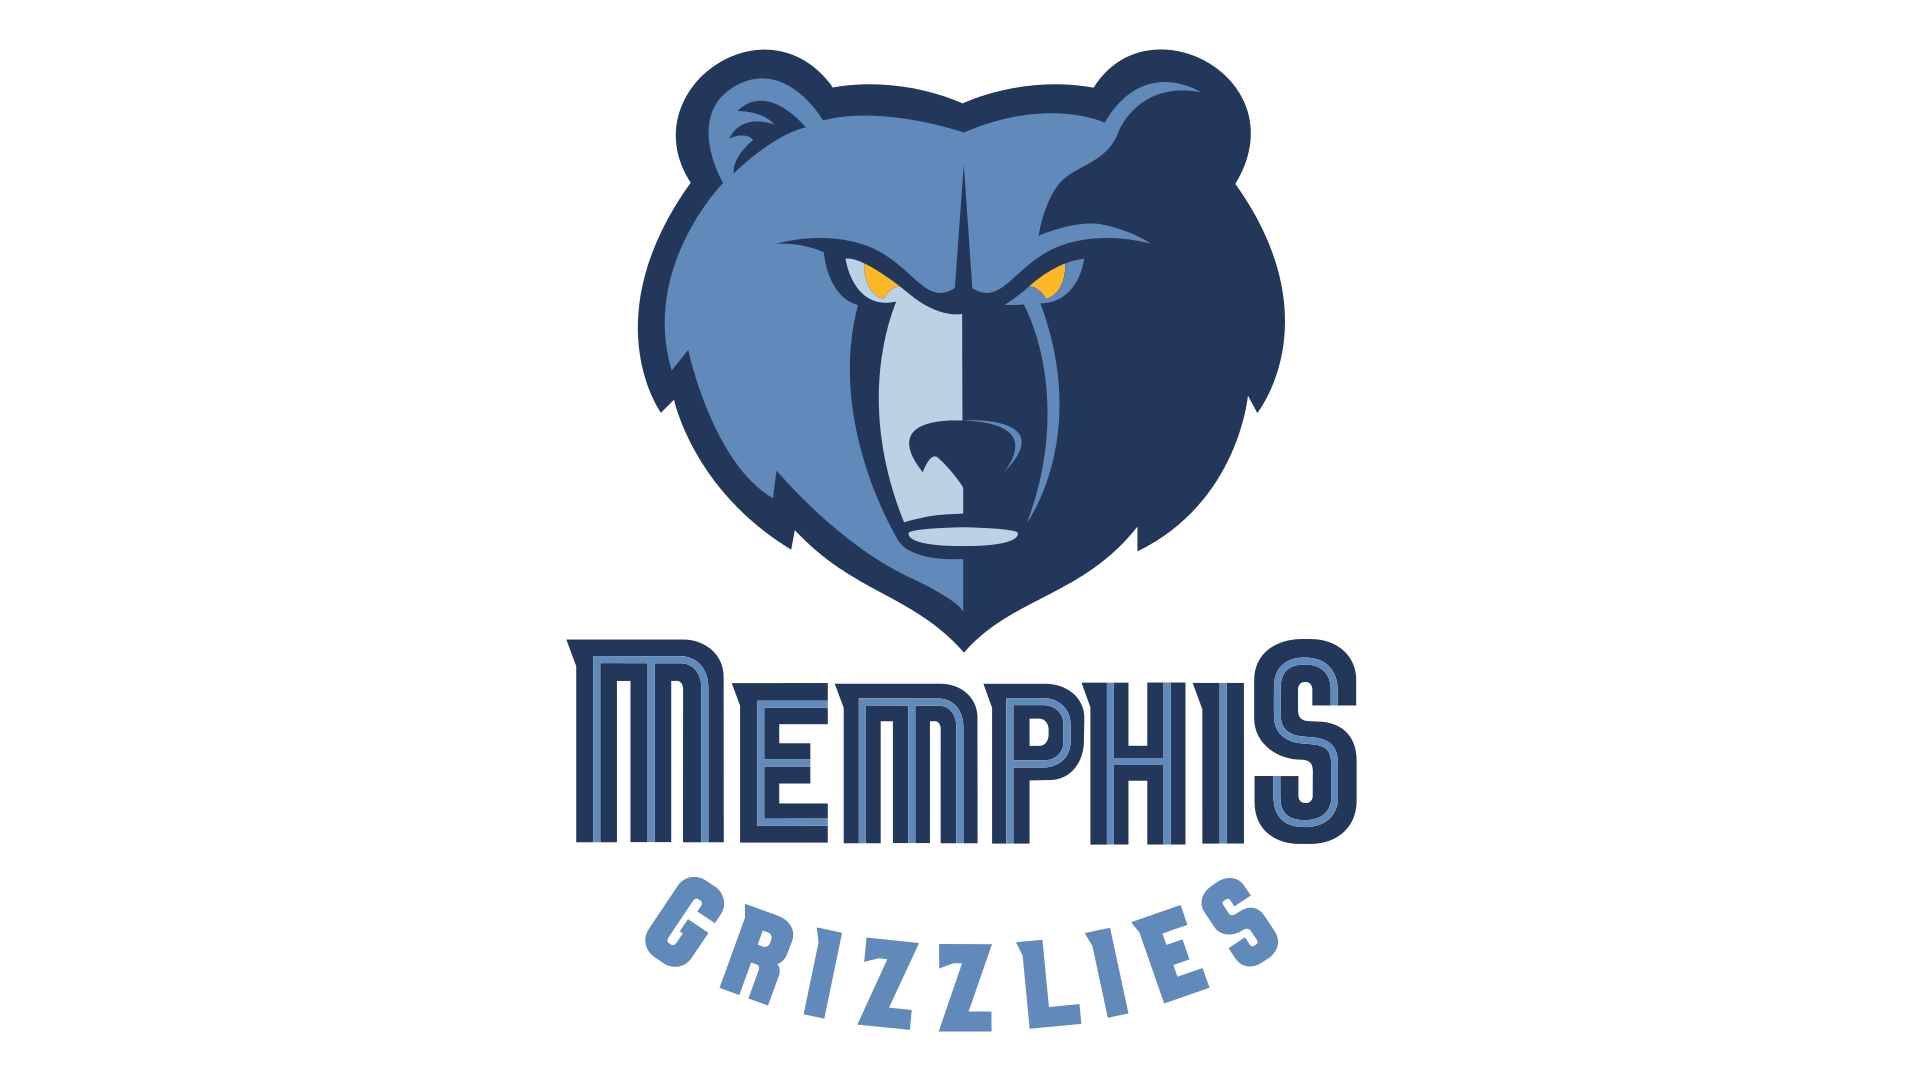 Gizzlies Logo - Meaning Memphis Grizzlies logo and symbol | history and evolution